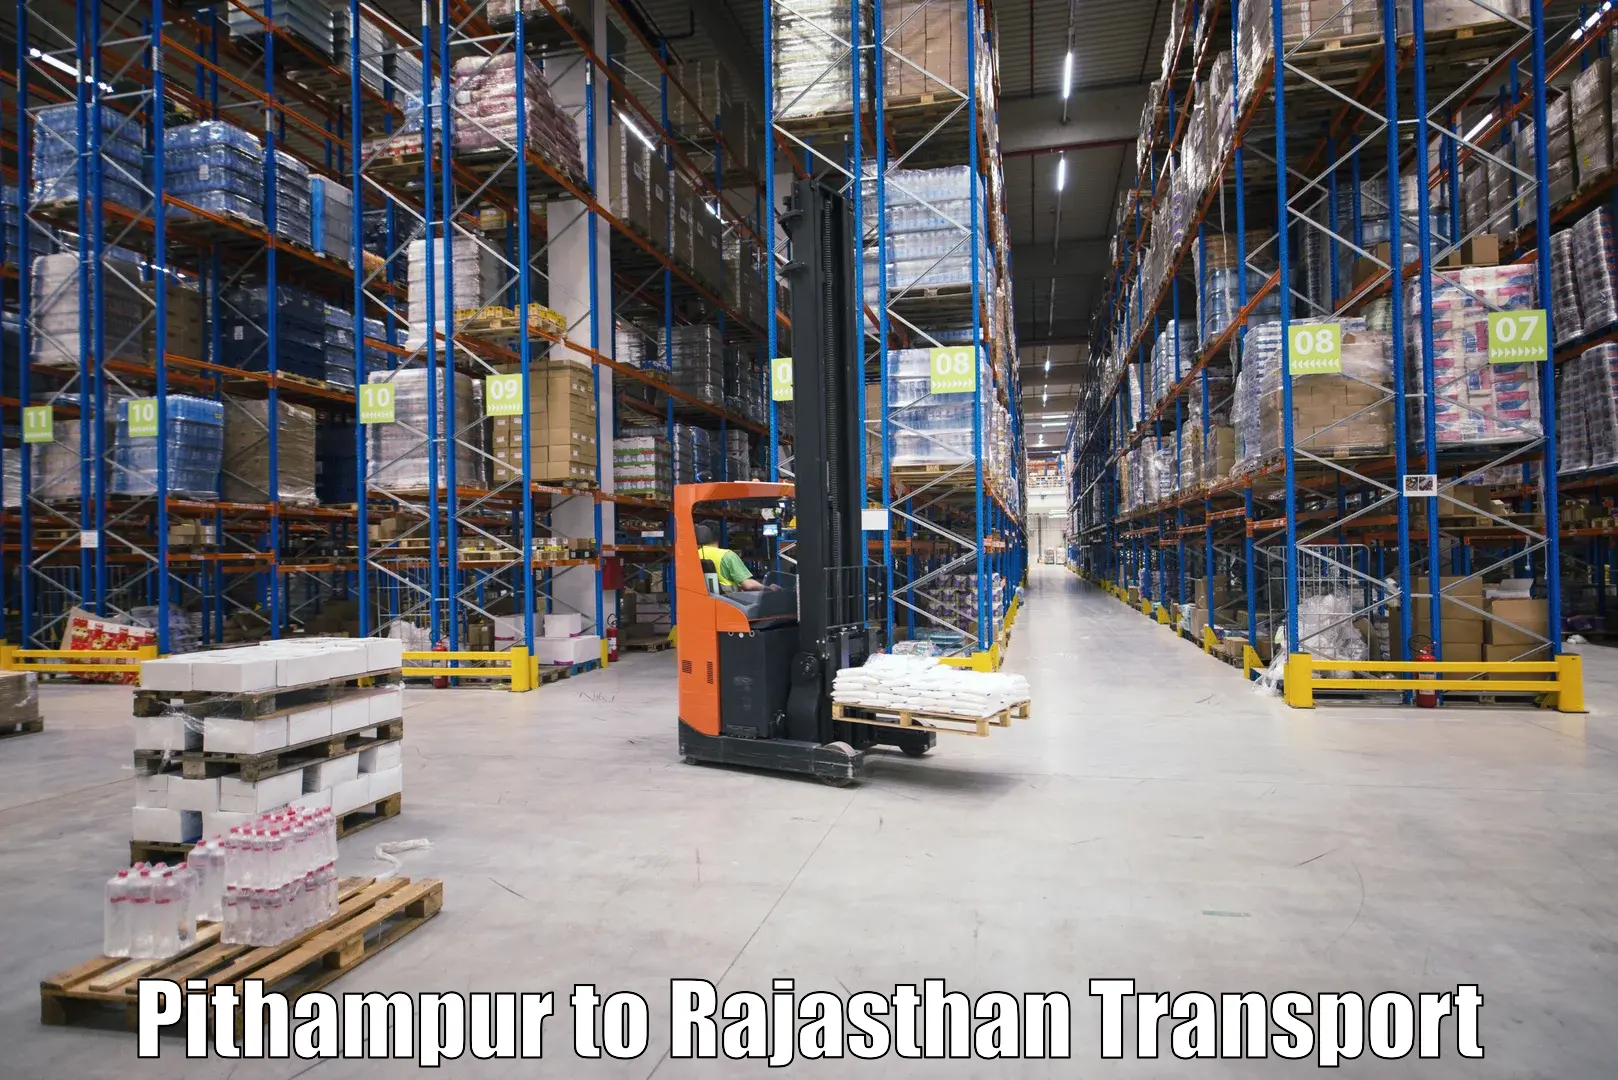 India truck logistics services Pithampur to Chaumahla